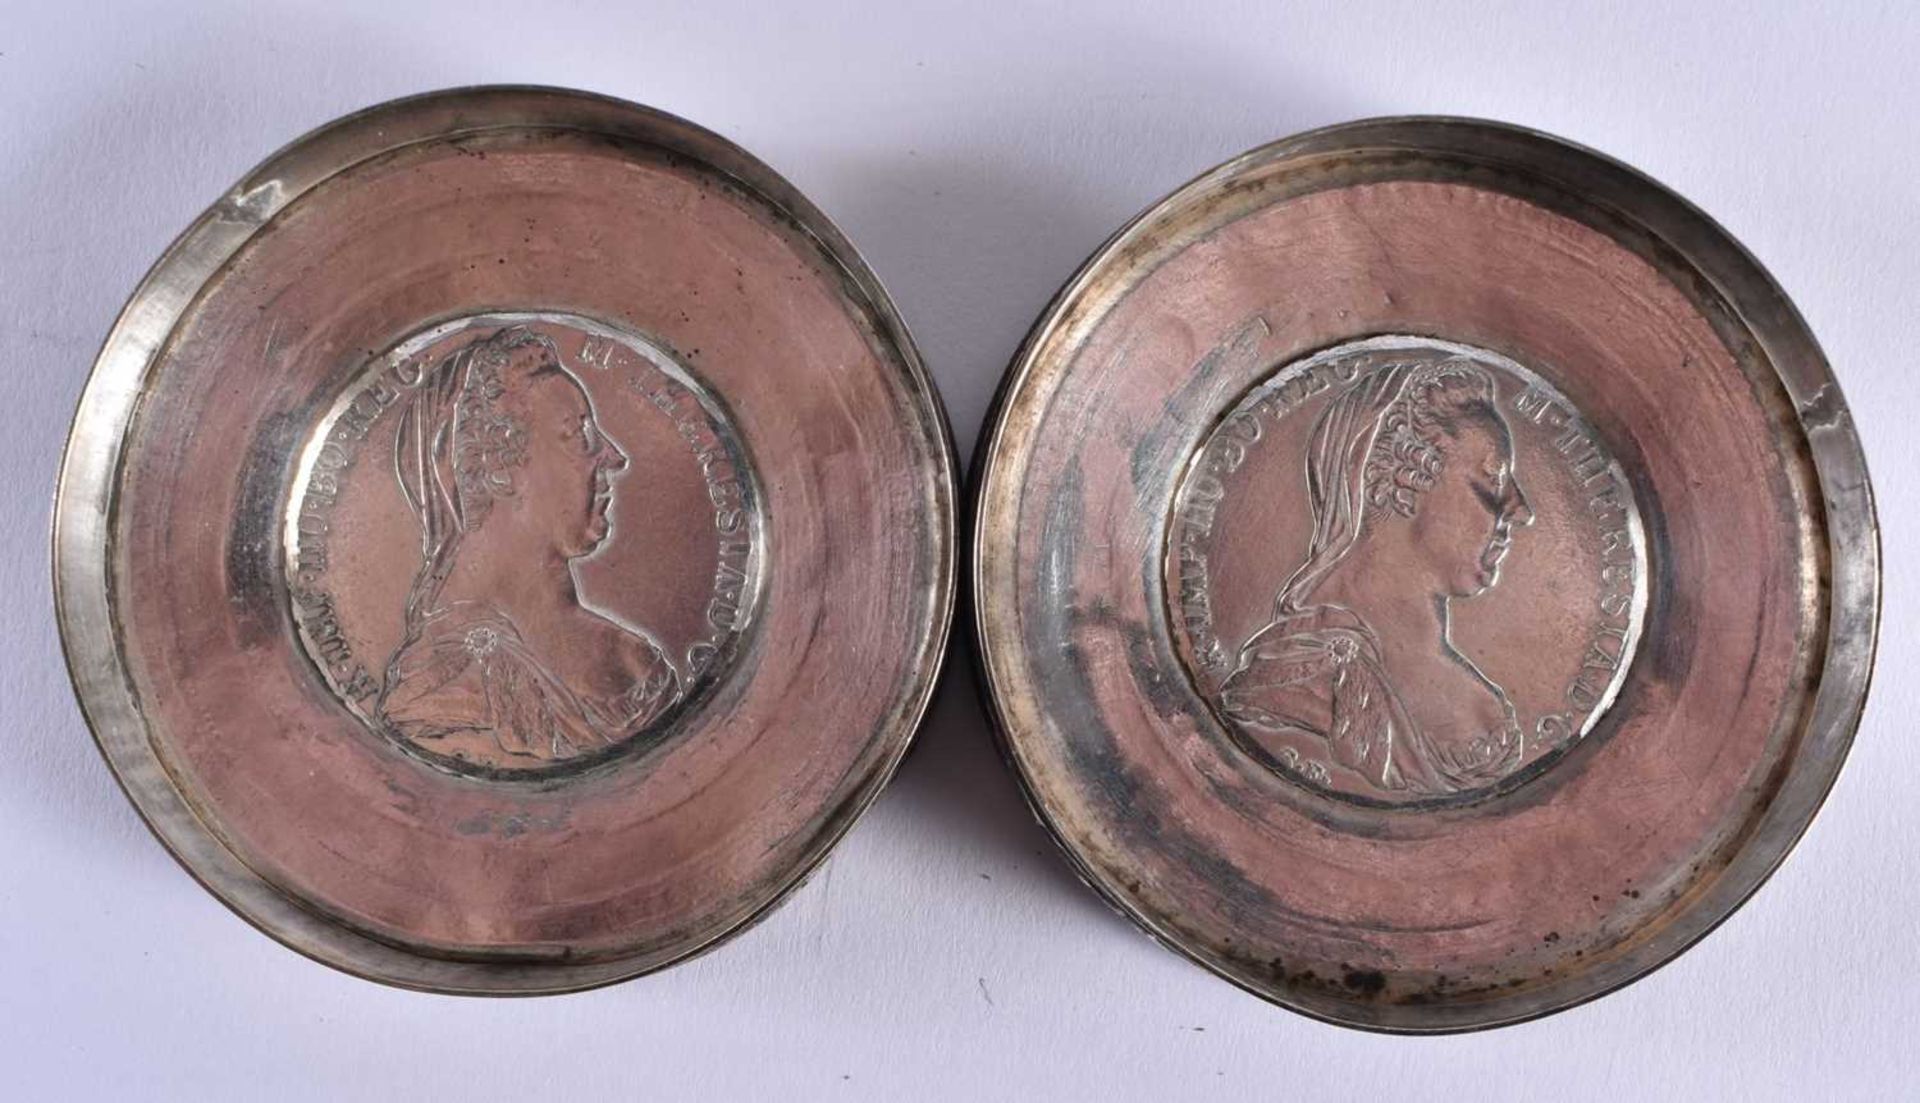 A PAIR OF ANTIQUE CONTINENTAL SILVER COIN INSET BOXES AND COVERS. 344 grams. 9 cm x 7.25 cm. - Image 5 of 6